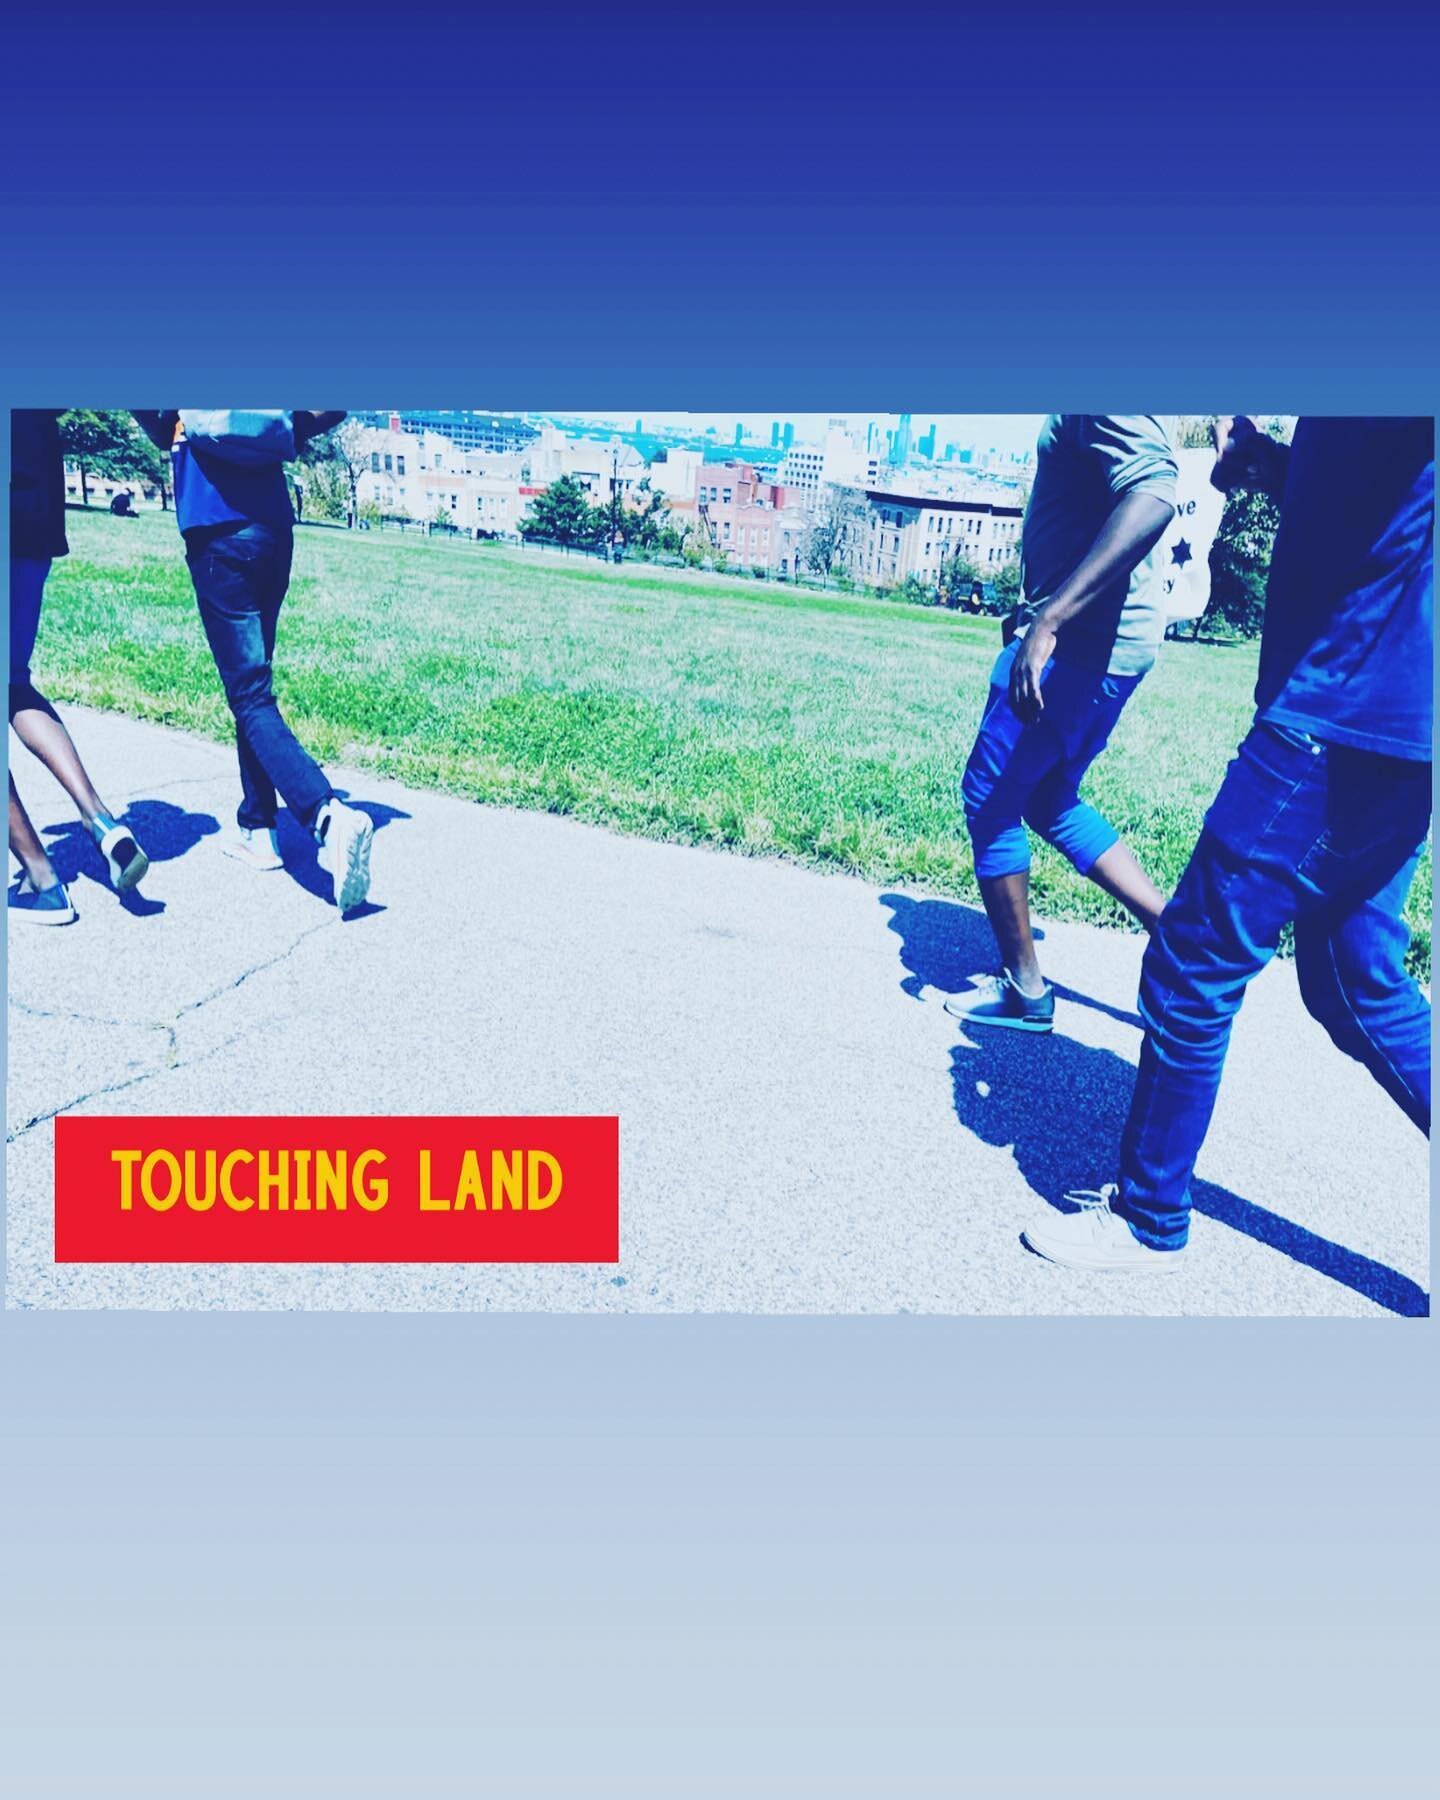 Refugee Running, Rights and Land workshop a success 💪🏽🏃🏾👟 We got runners from Mauritania, Senegal, Venezuela and Ghana. 

This workshops was a 5k run, our runners are newly arriving immigrants living in NYC shelters. They have been relocated mul